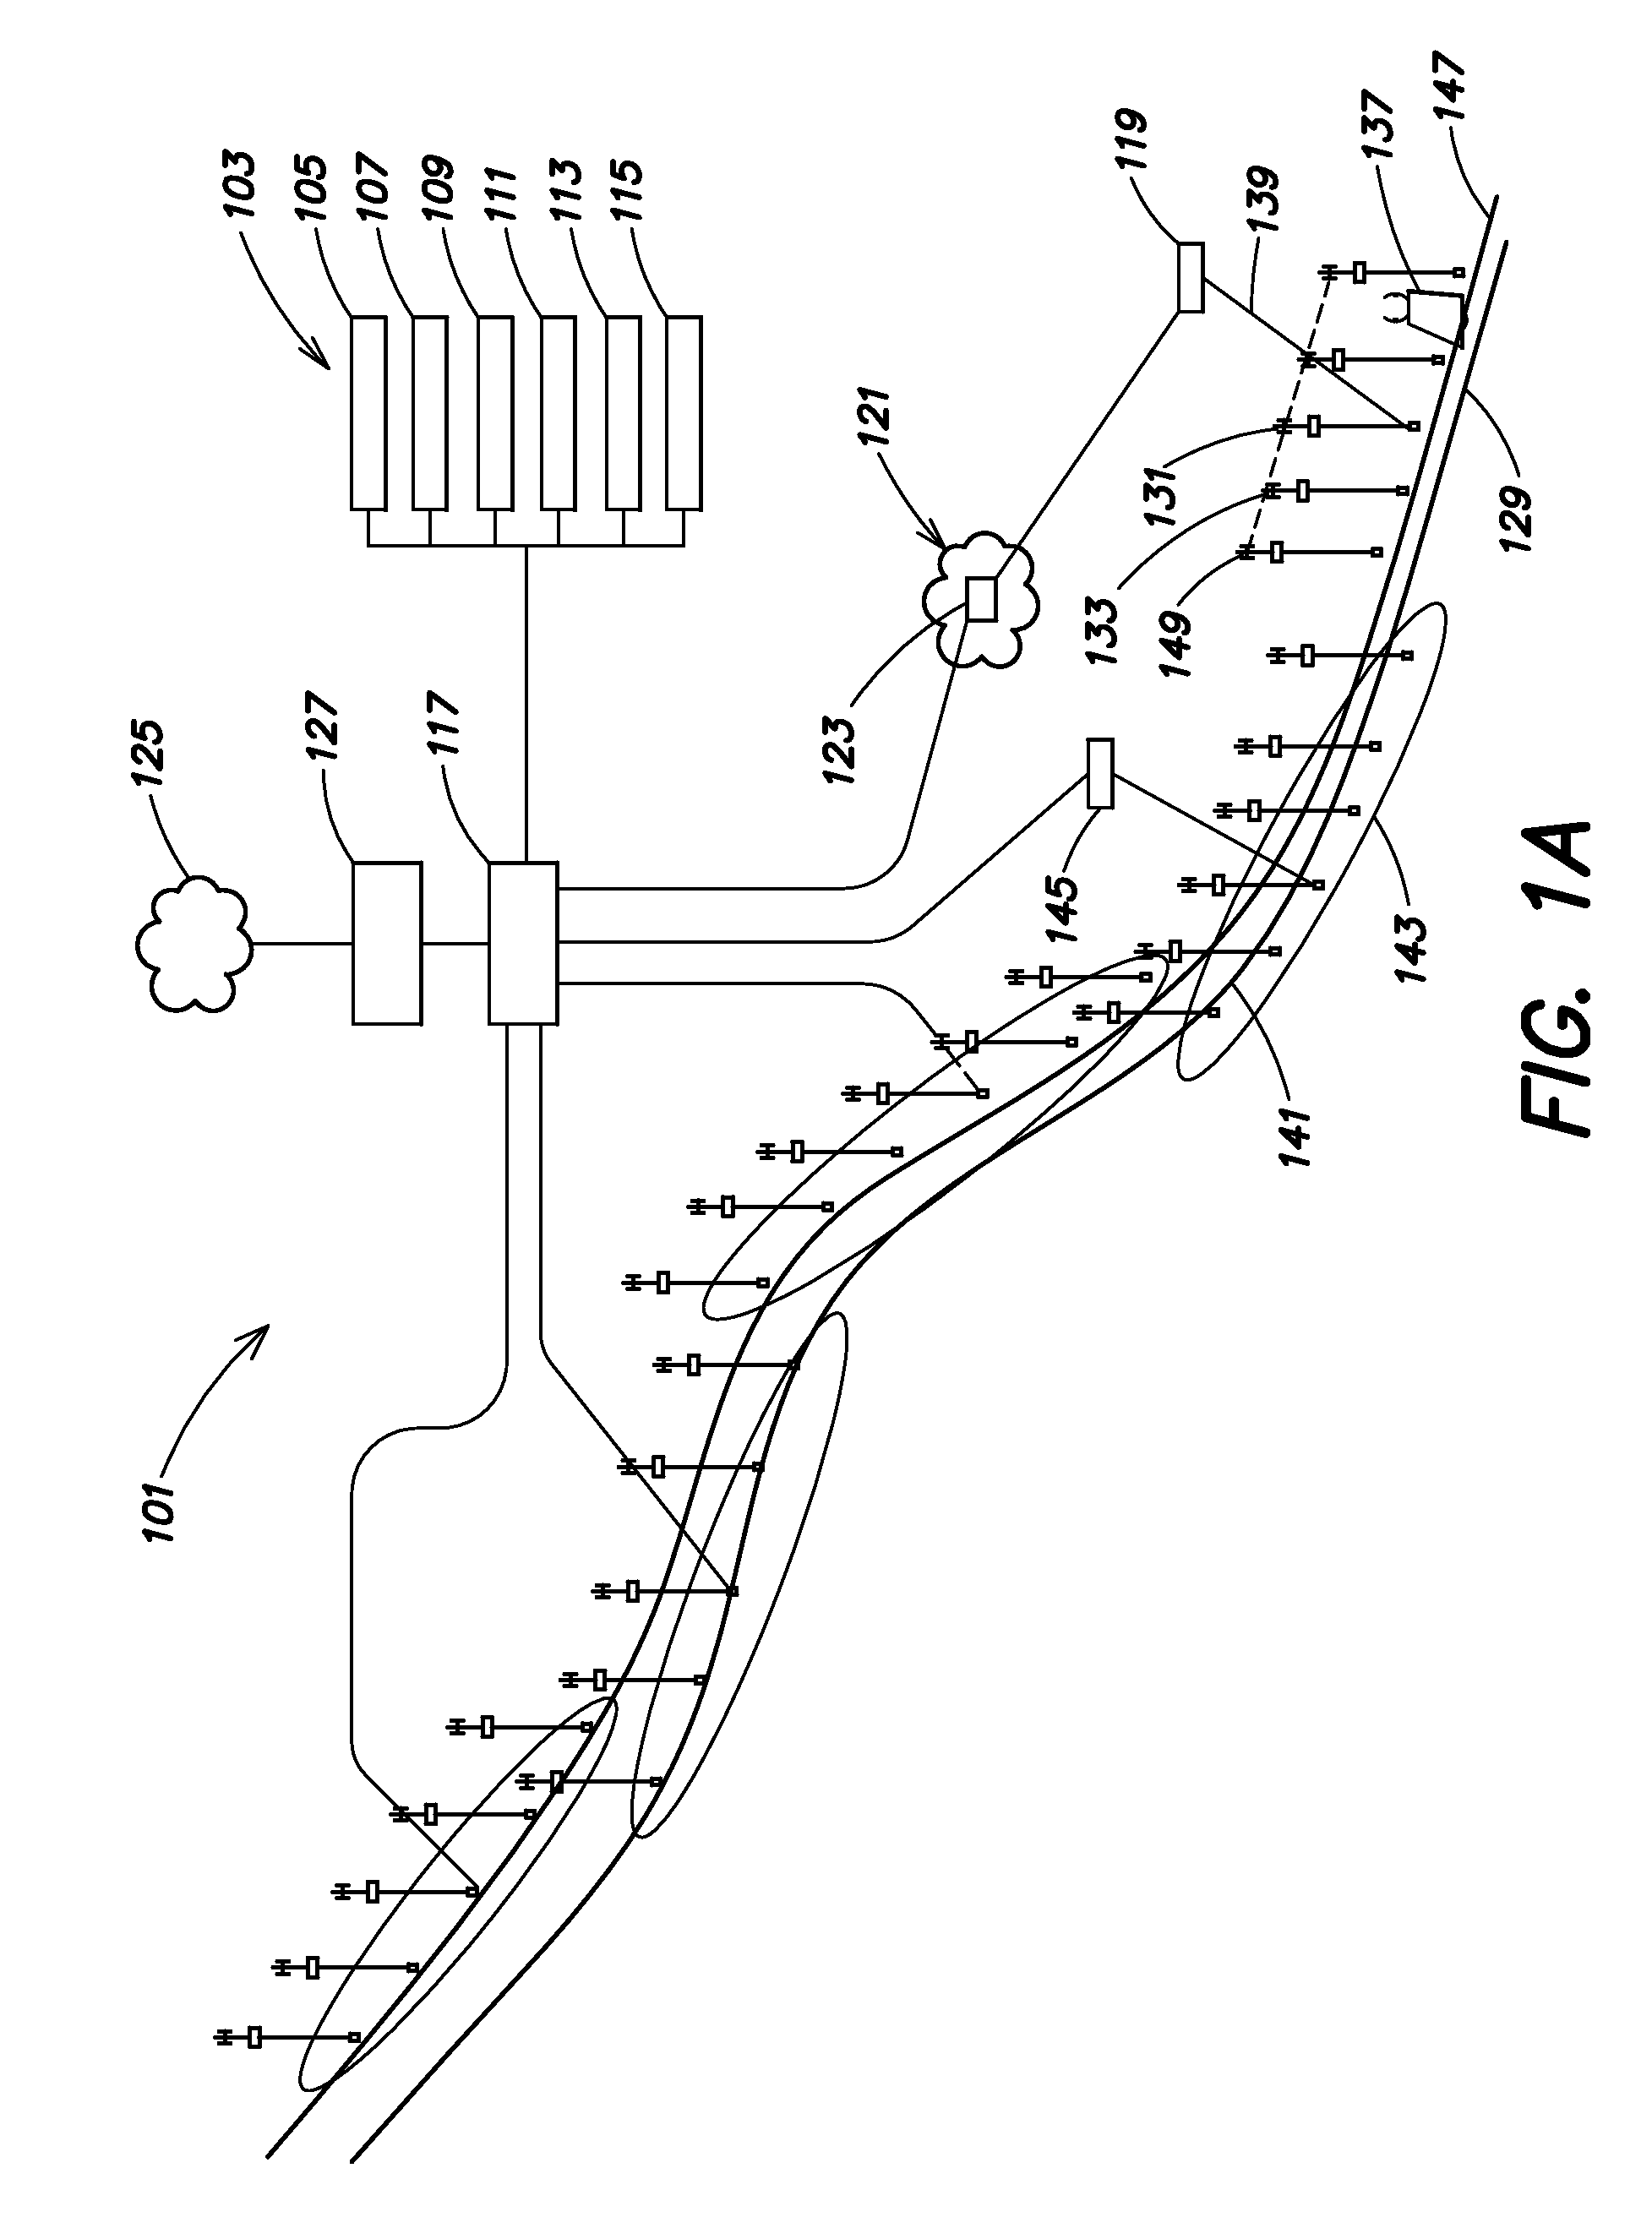 System for providing redundant communication with mobile devices